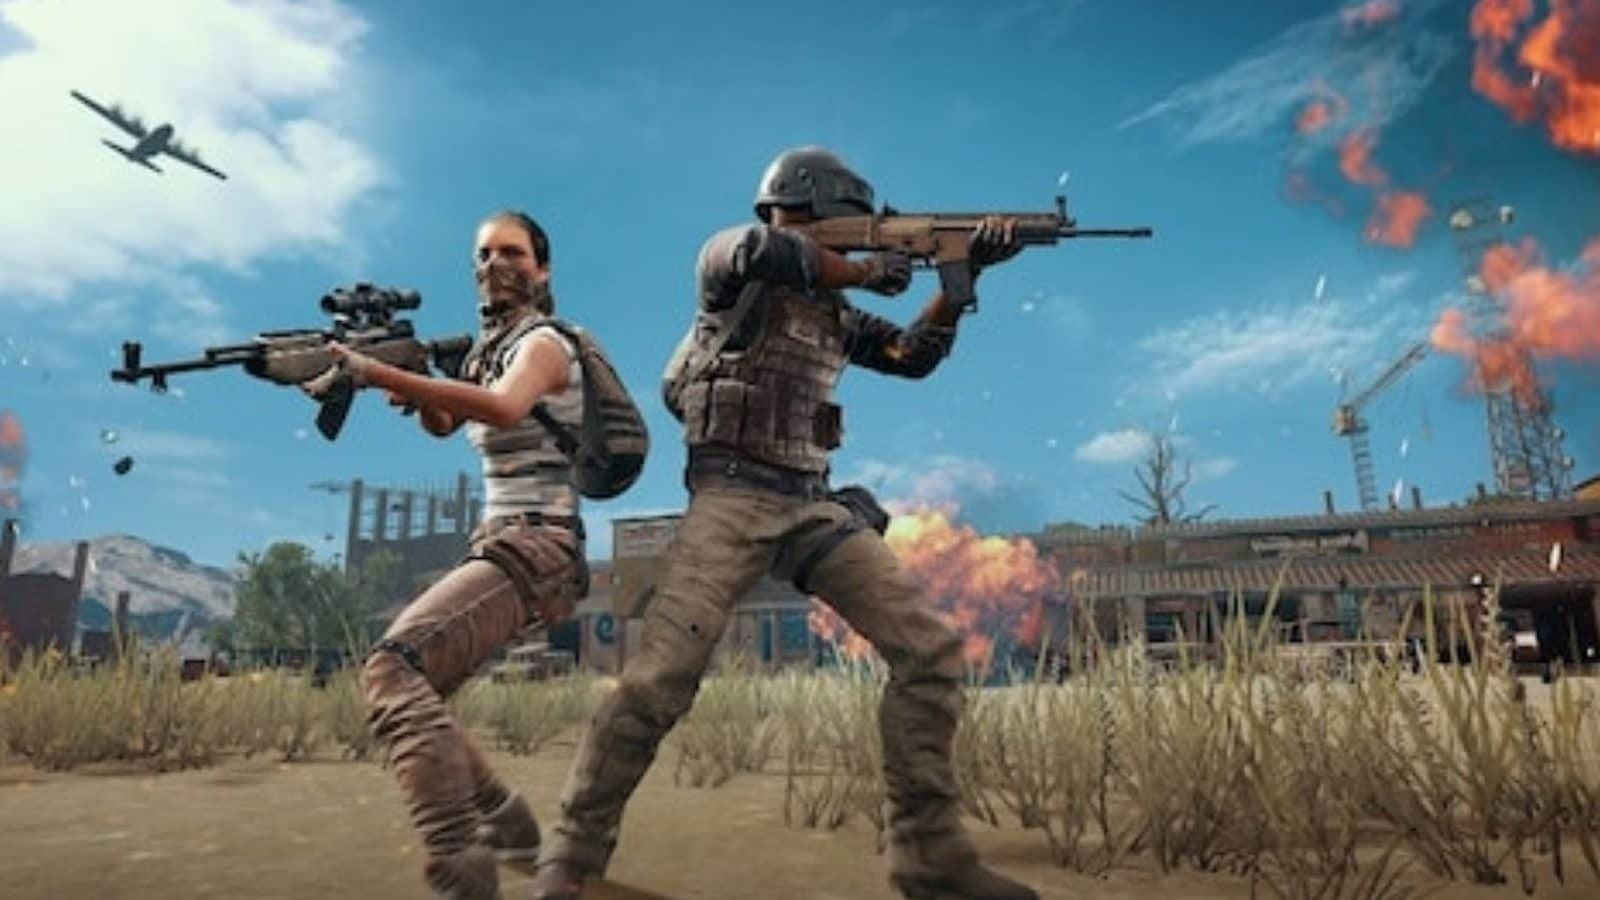 Battlegrounds Mobile India Update 1.8.5 Brings New Team Death Match Map, Characters And More